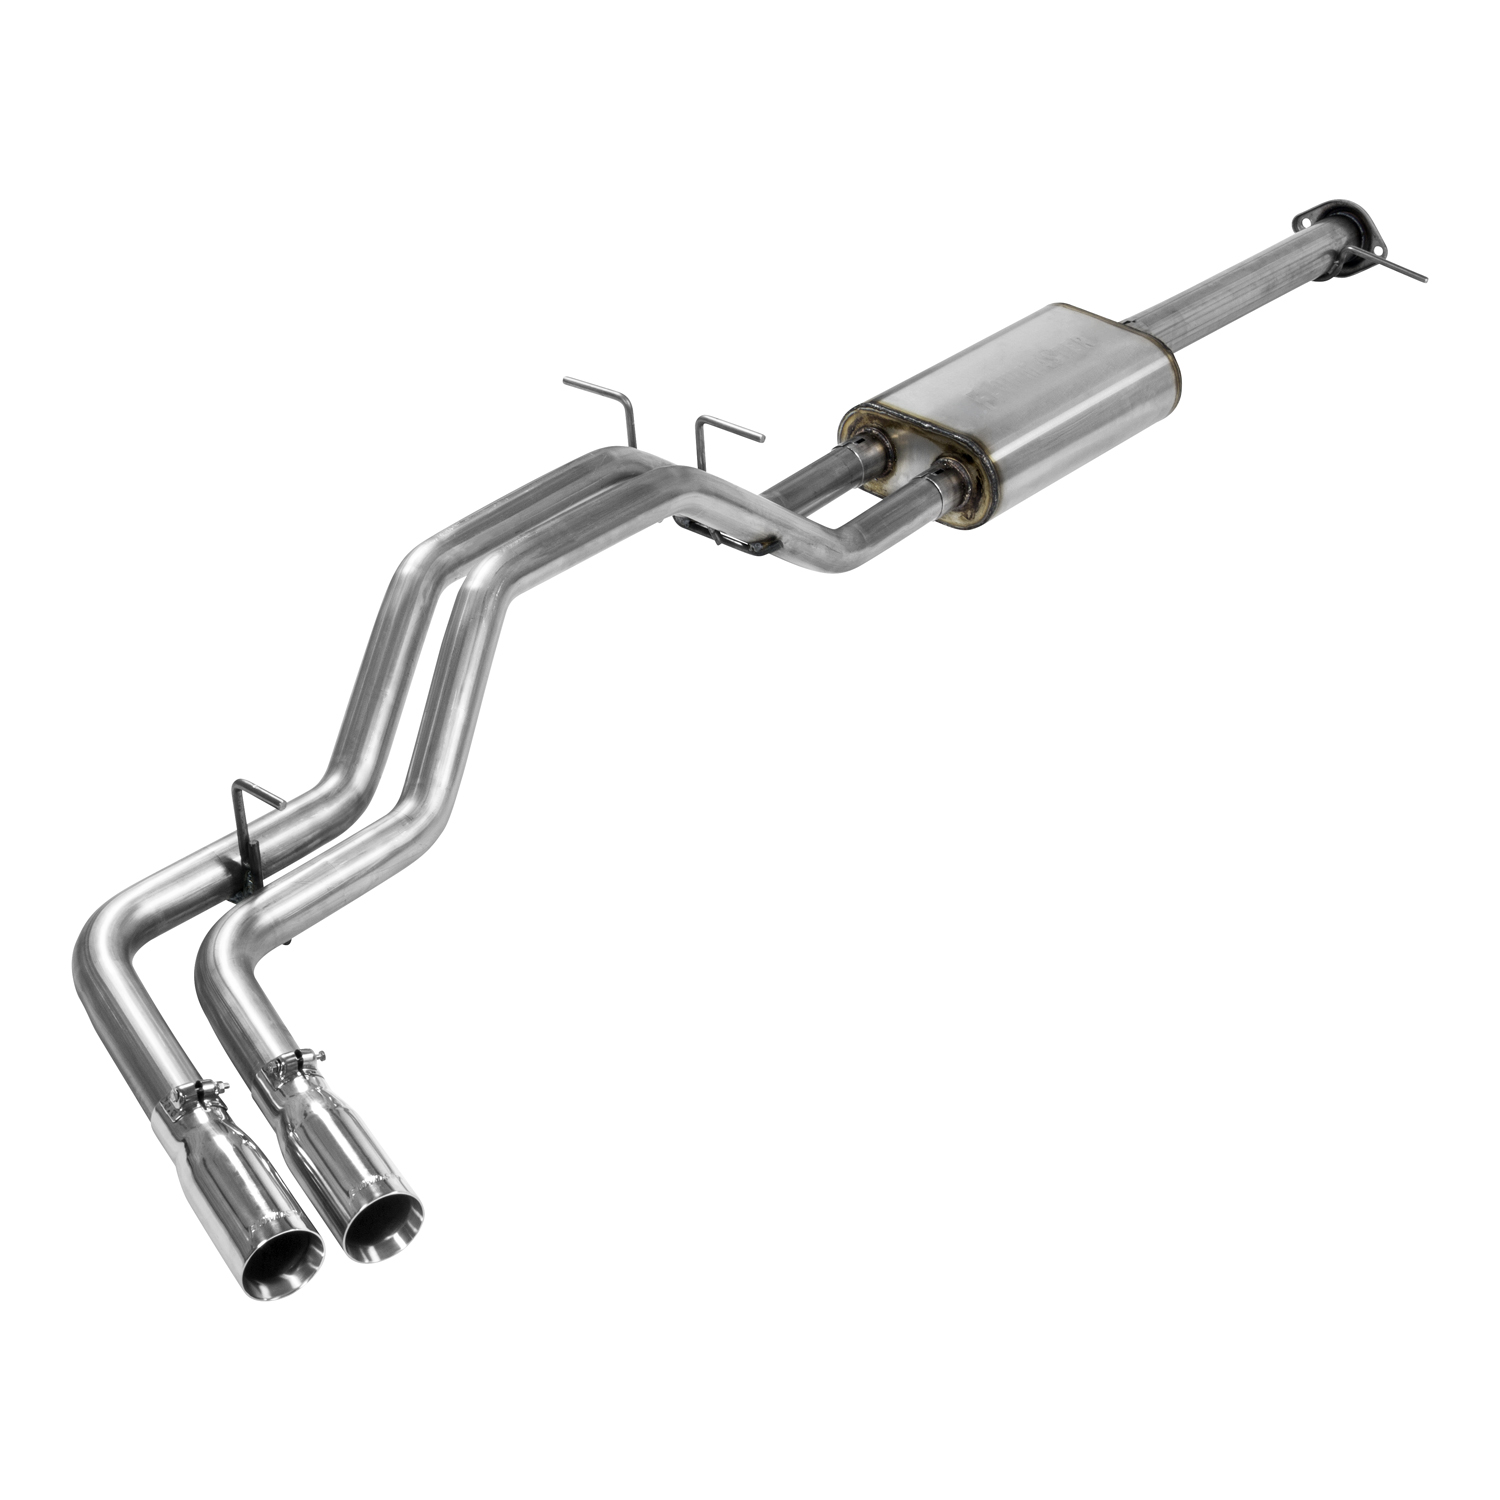 2015 - 2018 GMC Canyon and Chevrolet Colorado 3.6L FlowFX Cat-Back Exhaust System